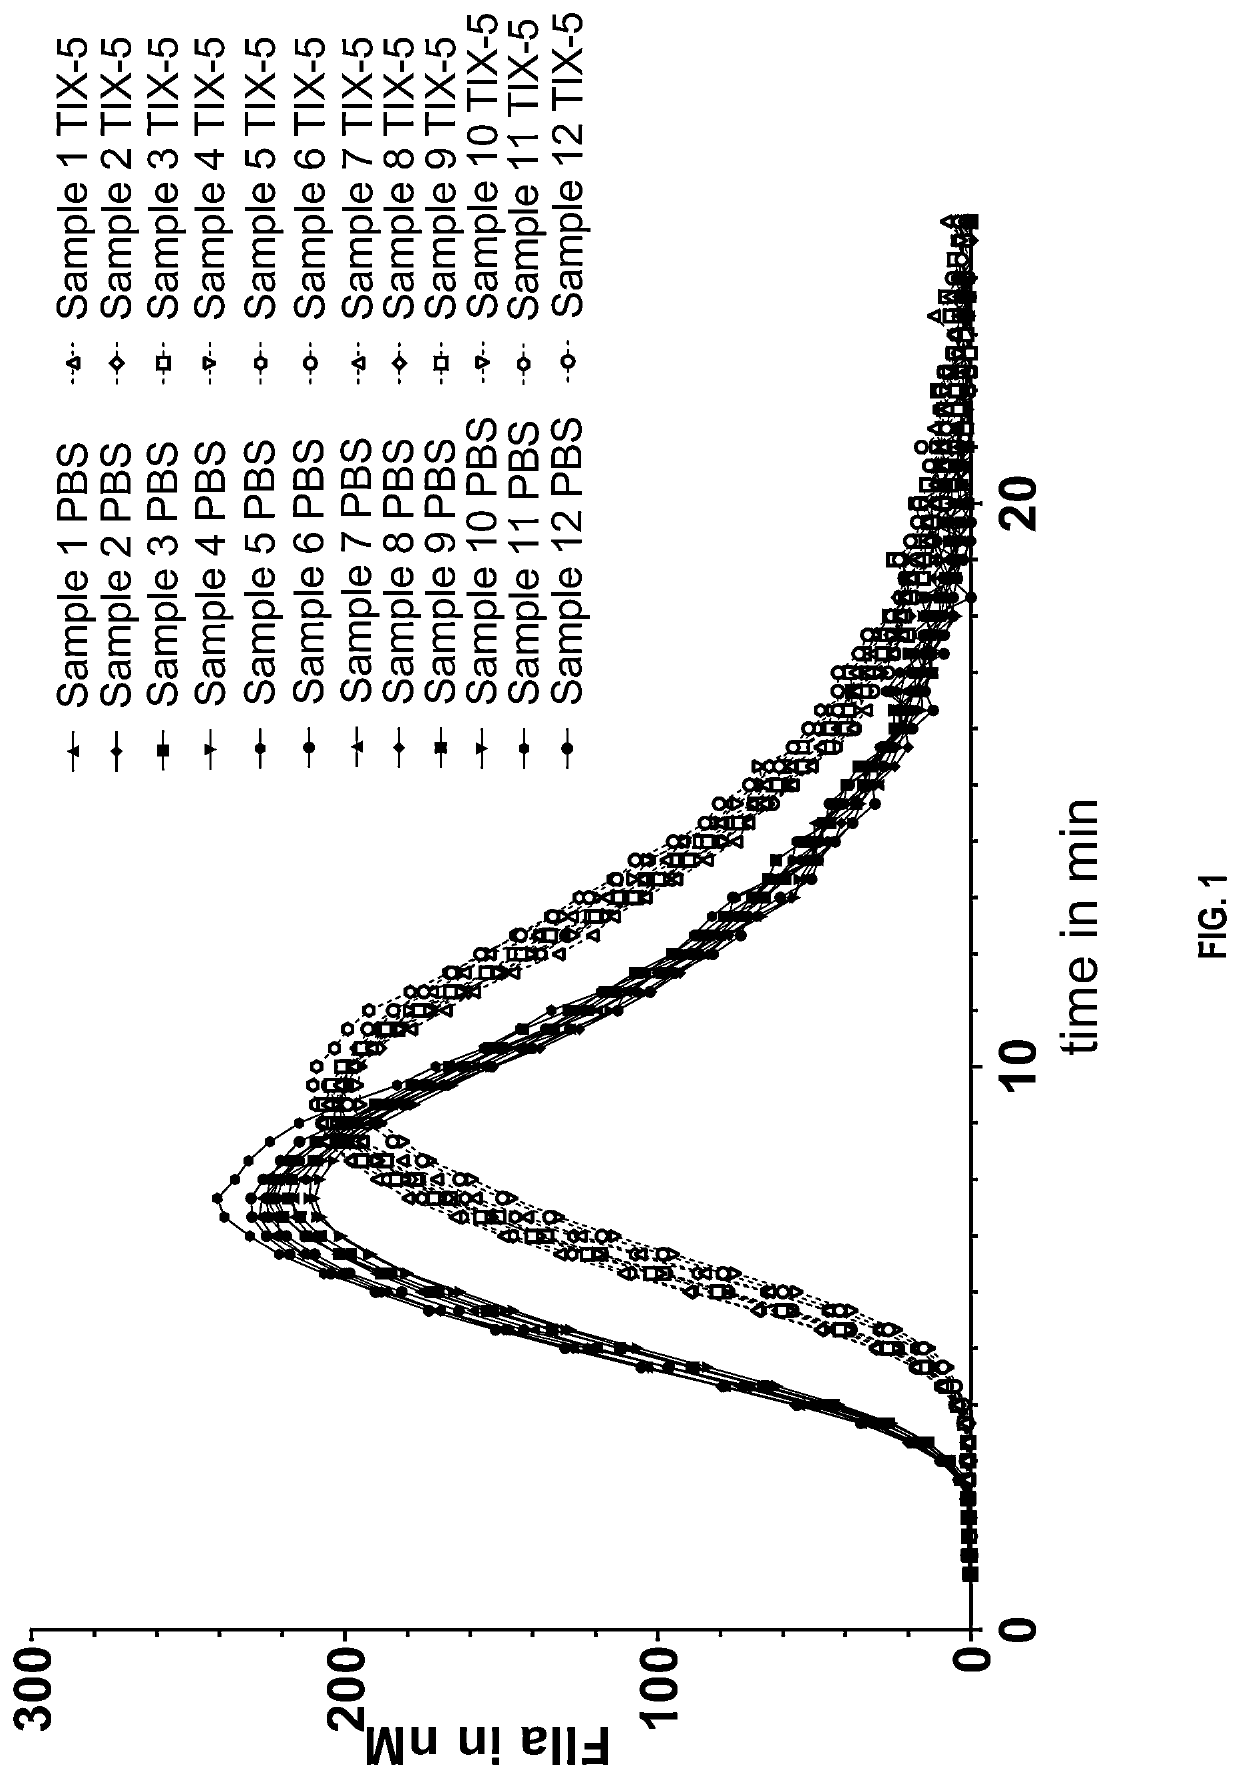 Method for determining the risk of a thromboembolic event